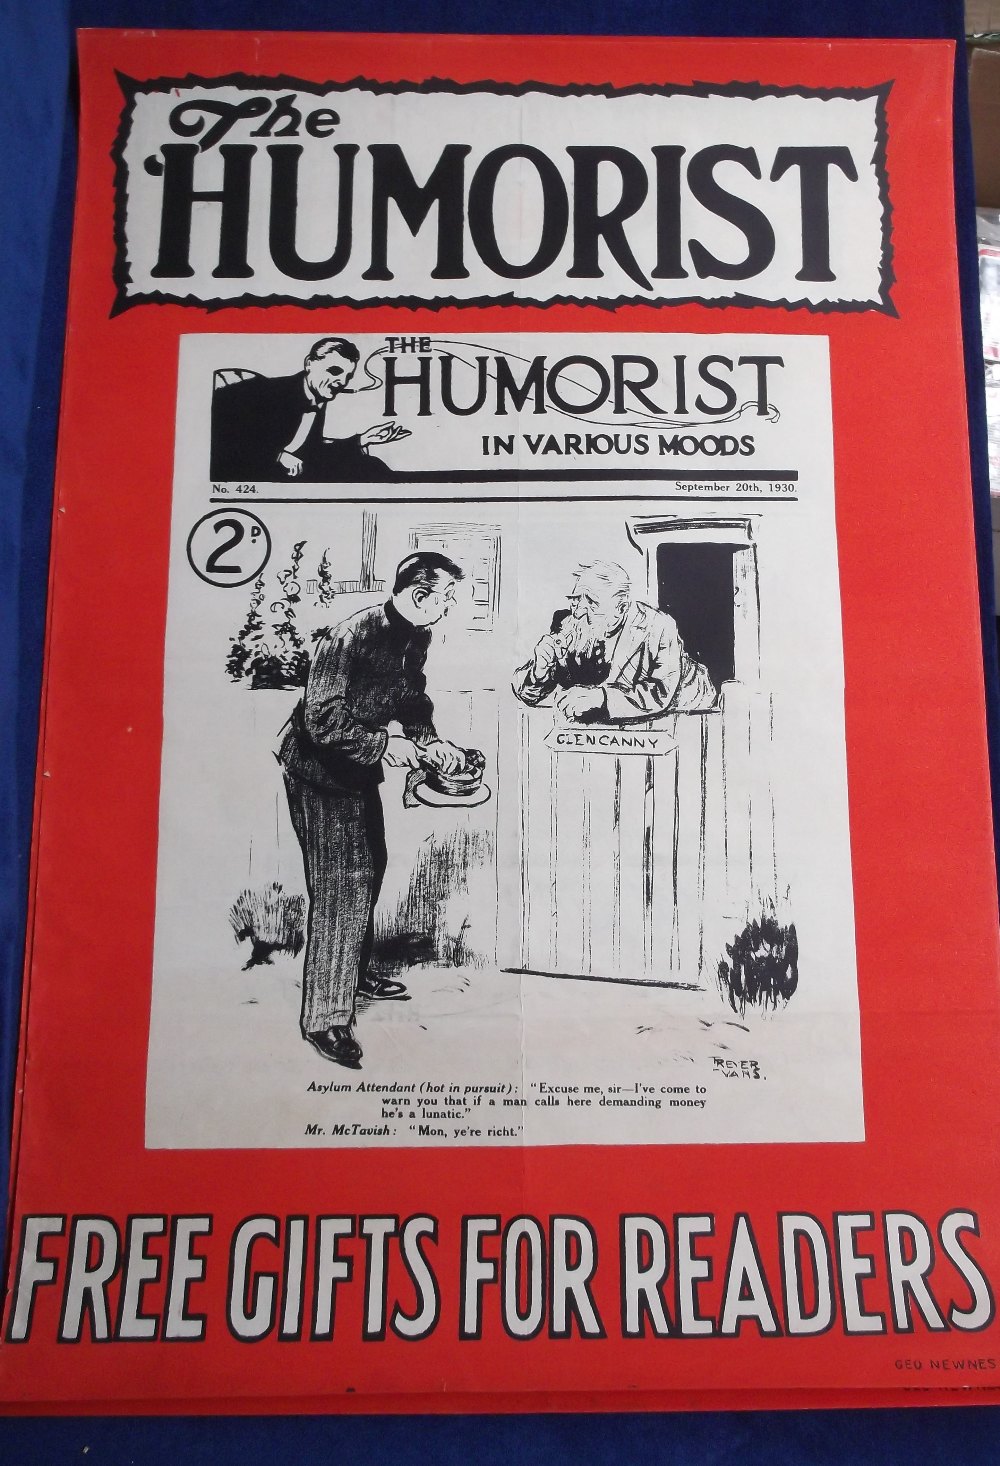 Posters, two Humorist magazine posters, 1930's, both with illustrations by Treyer Evans (illustrator